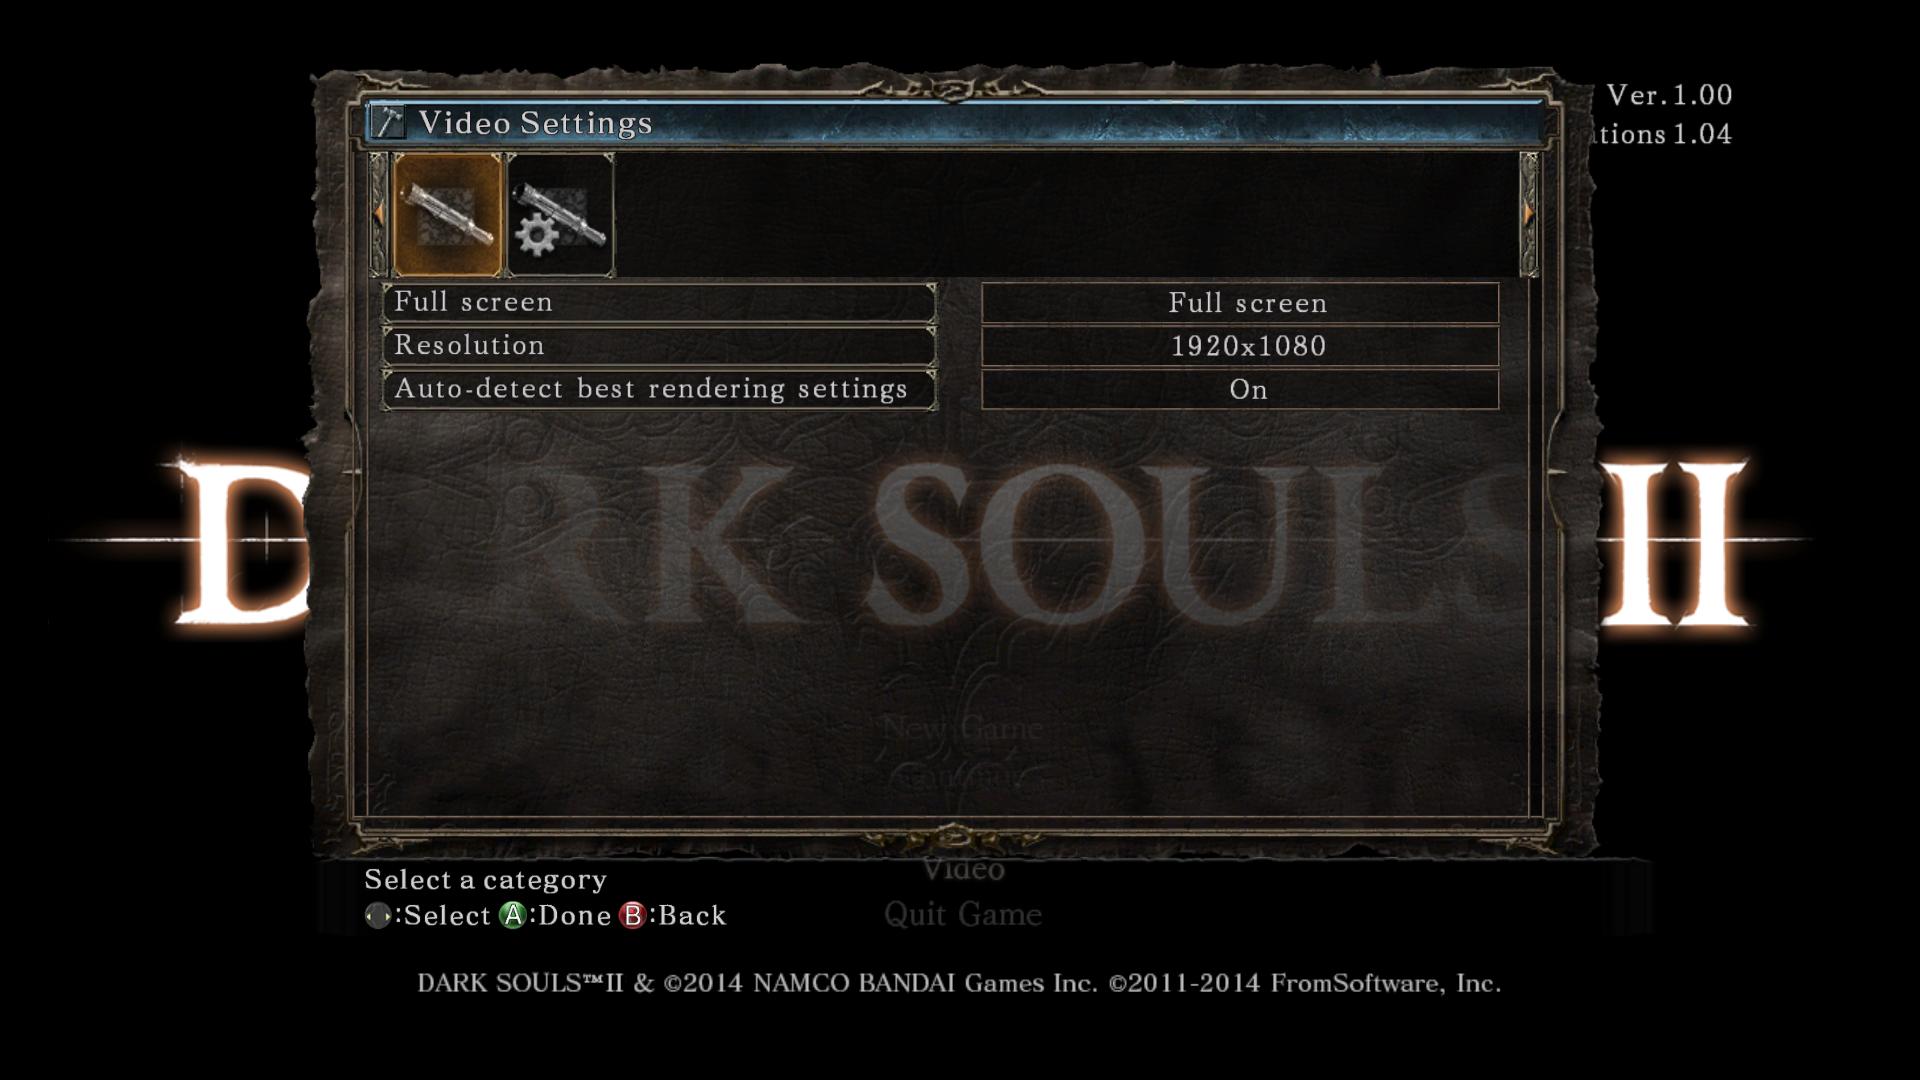 Here Are All The Settings For Dark Souls II On PC